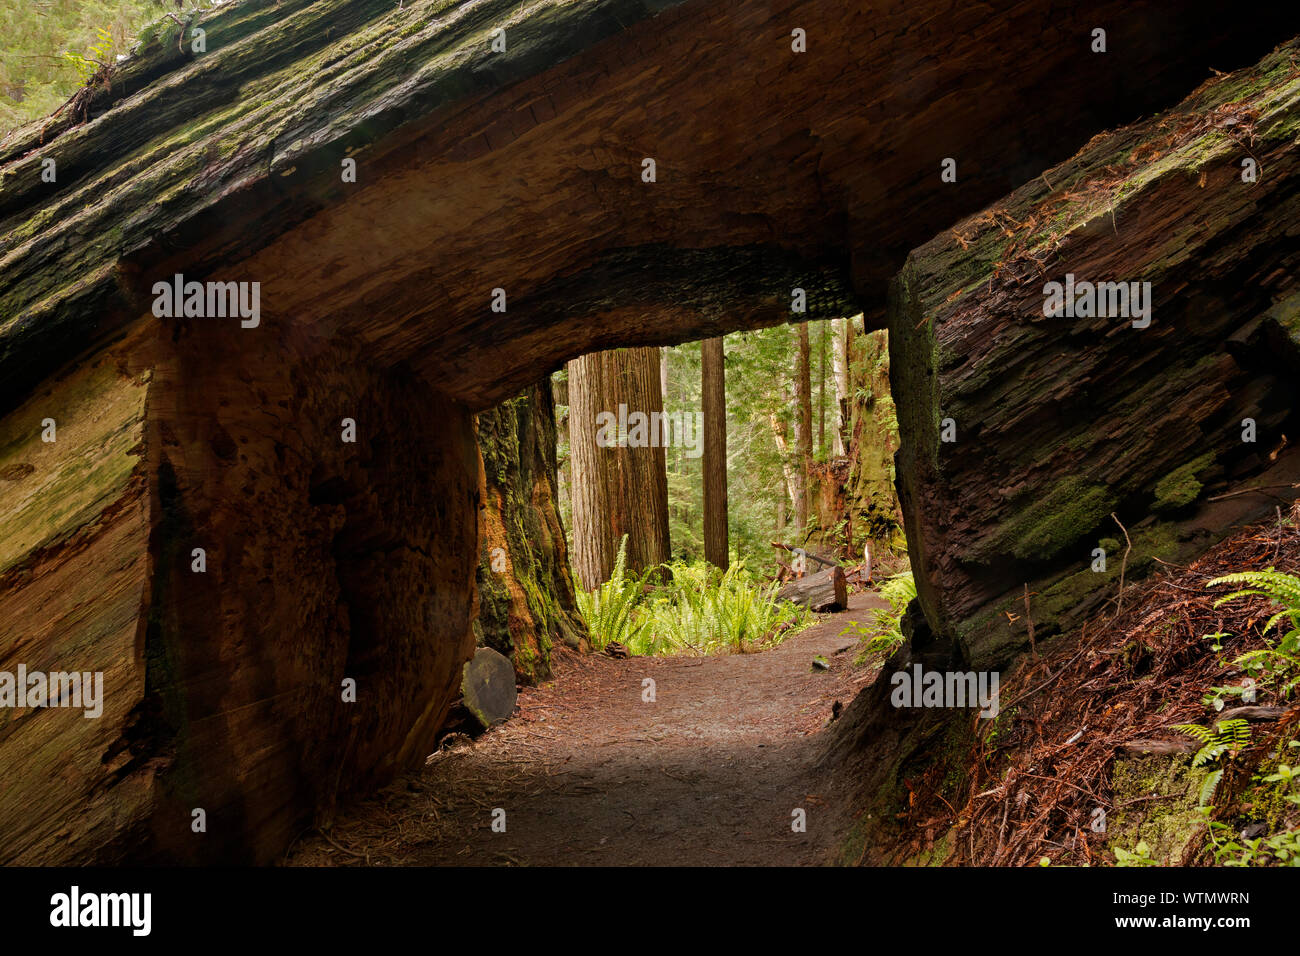 CA03548-00...CALIFORNIA -  Massive redwood log with a tunnel carved through it on trail through the forest at Prairie Creek Redwoods State Park; part Stock Photo